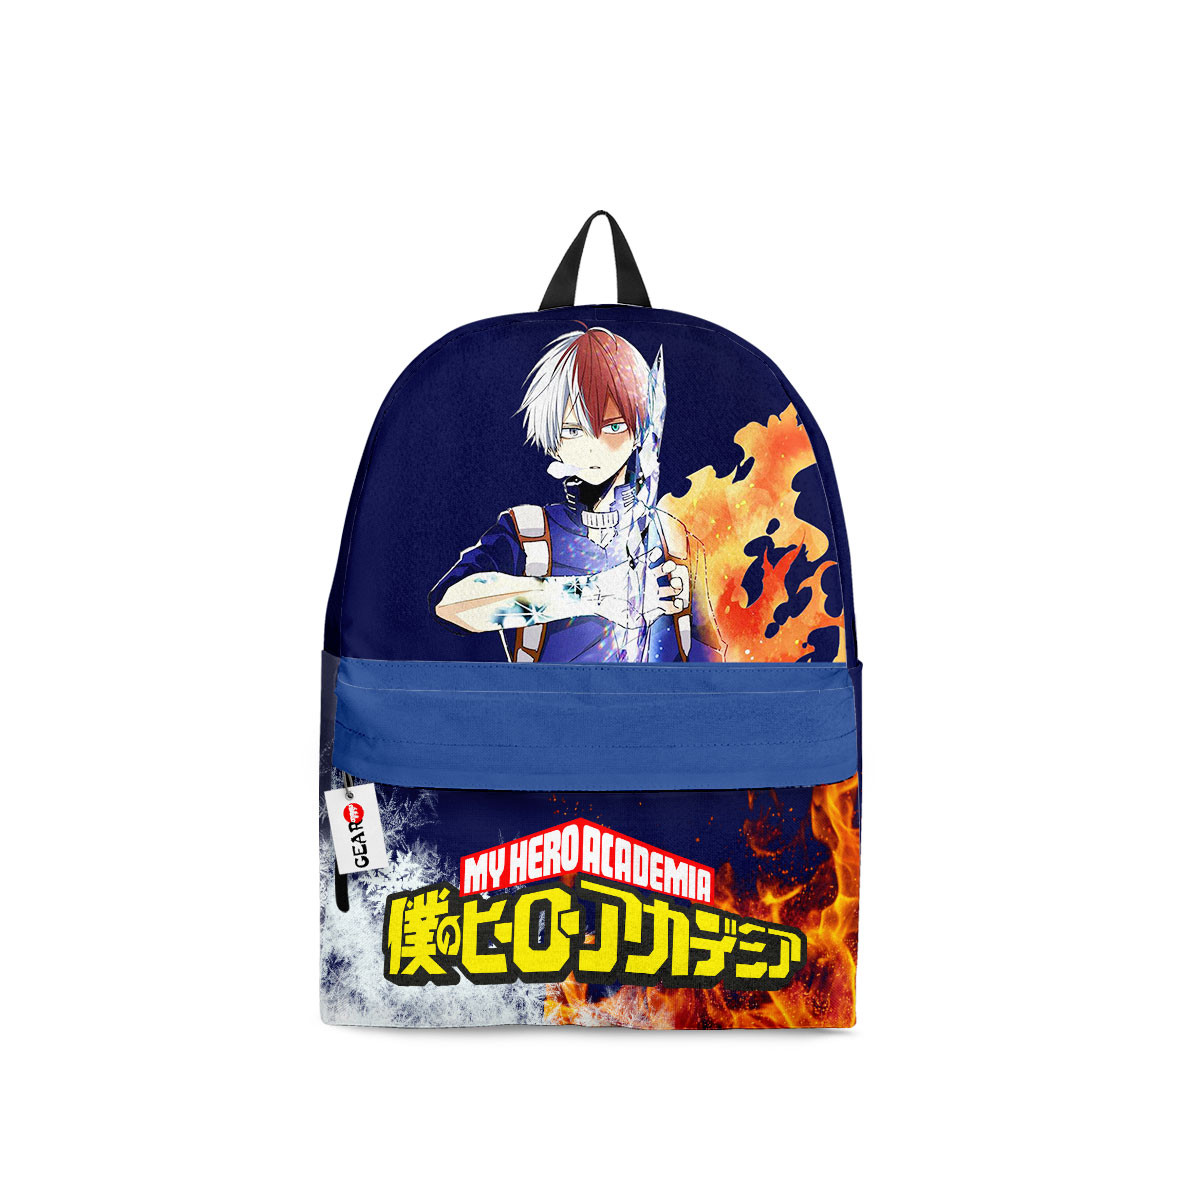 Latest Anime style products 181